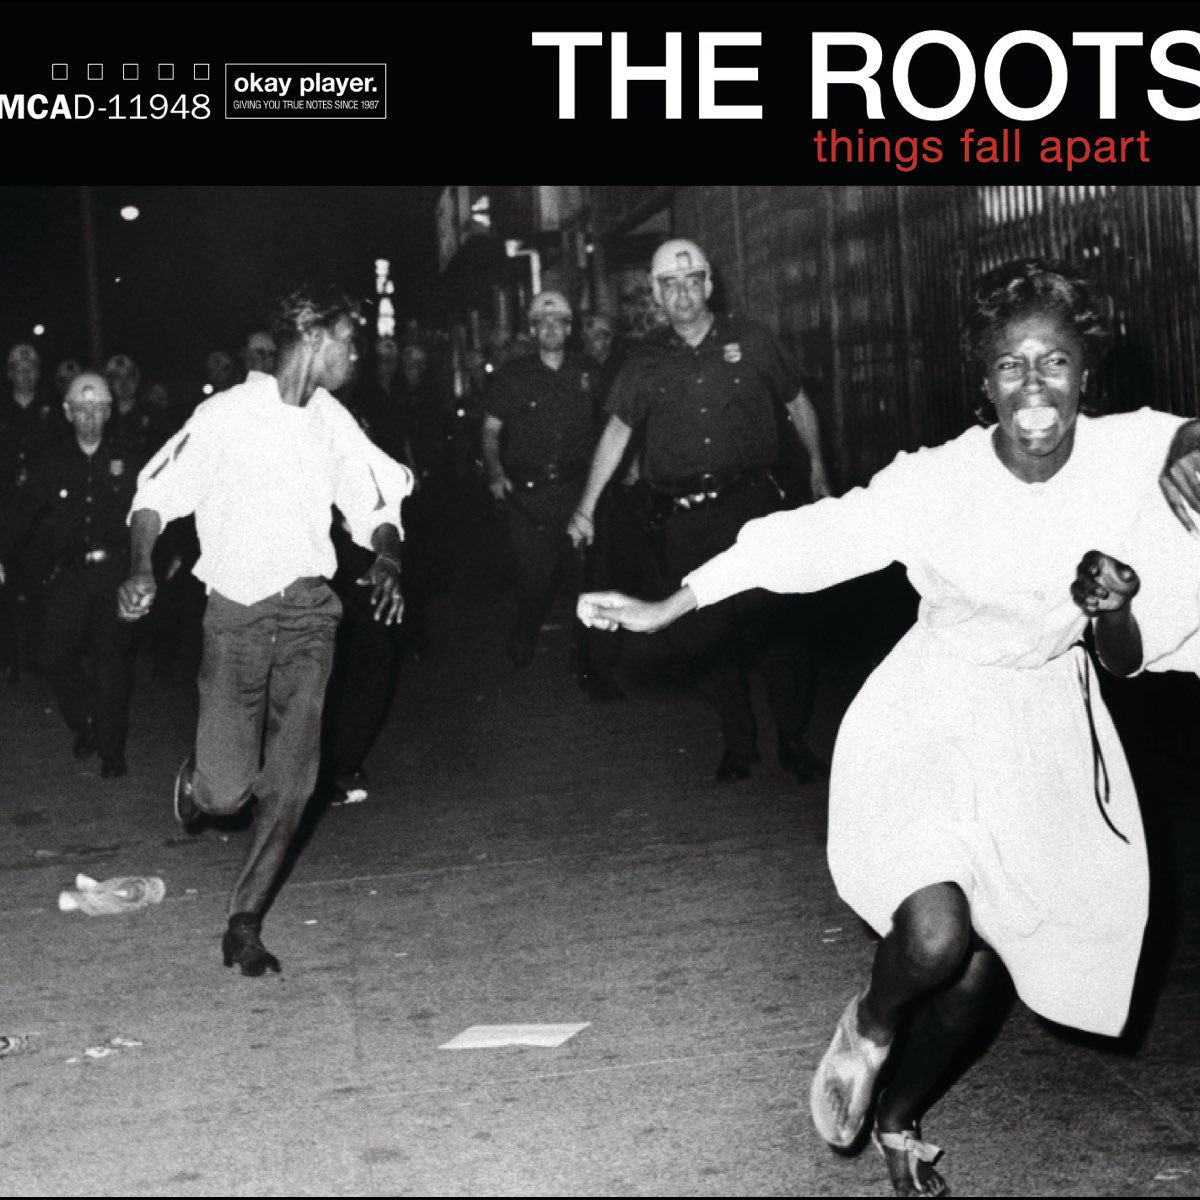 Roots, The: Things Fall Apart (Vinyl 2xLP)